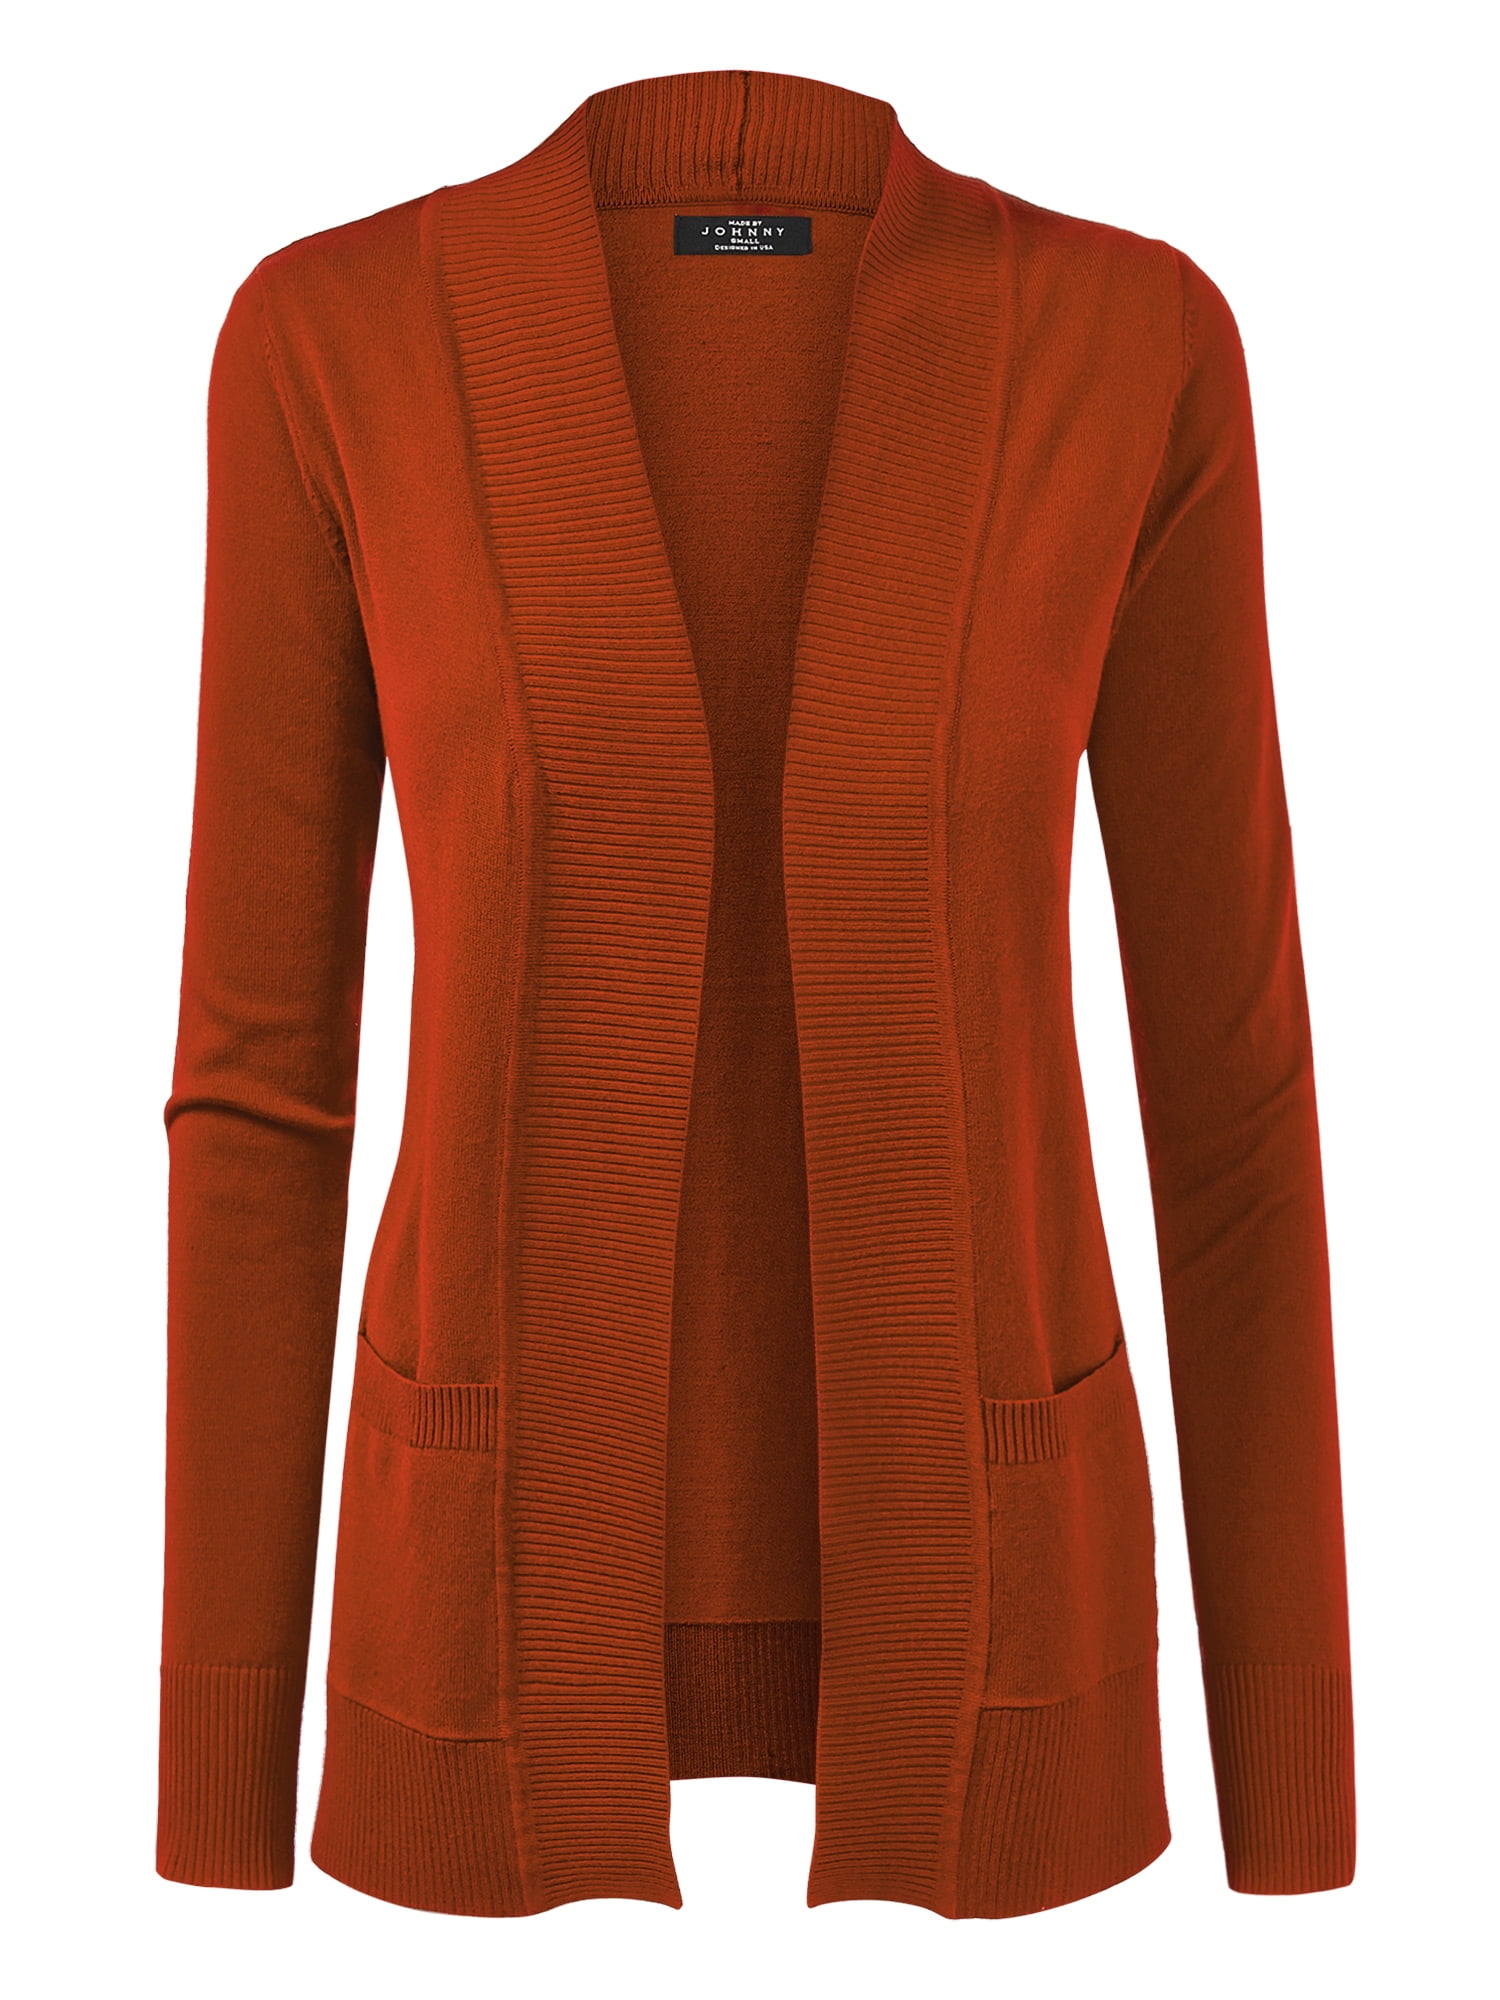 Now or Never Rust Orange Knit Cardigan